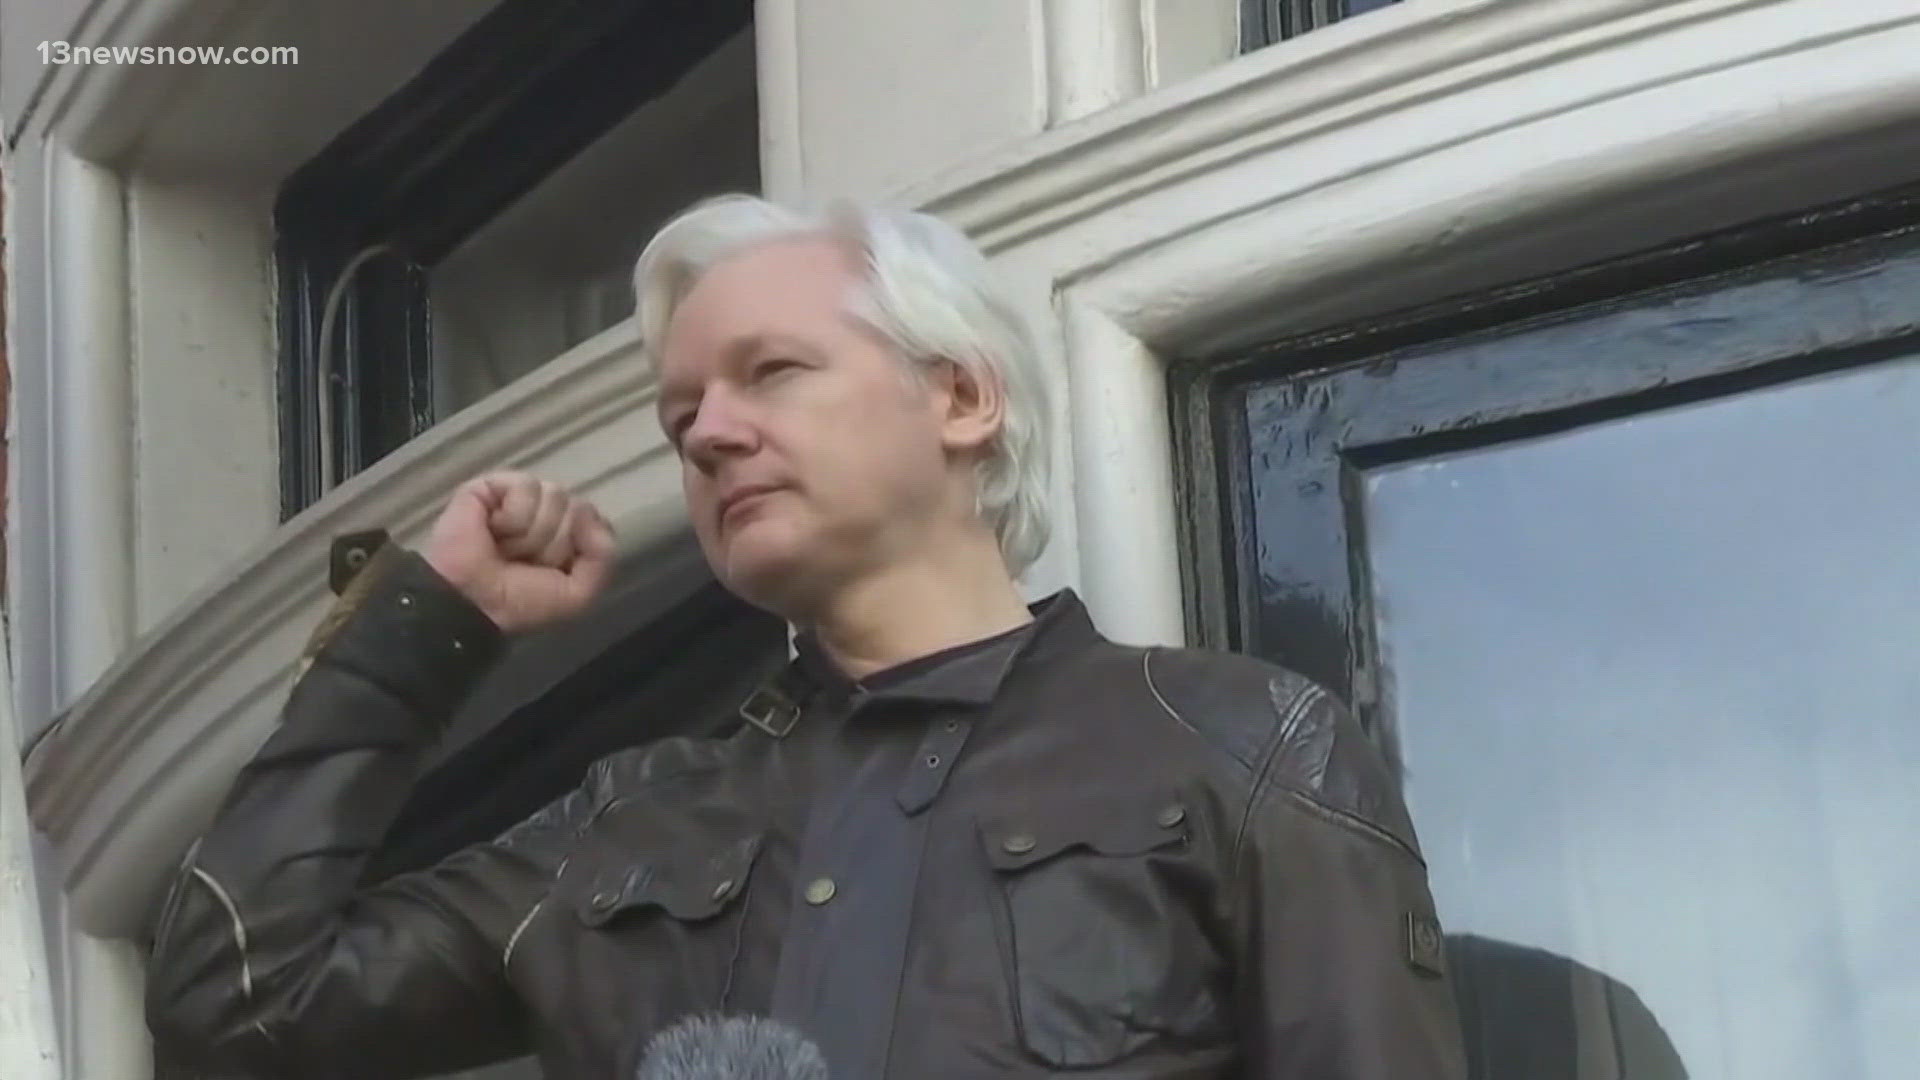 The WikiLeaks founder returned to his home country, bringing an end to a 14-year legal battle.